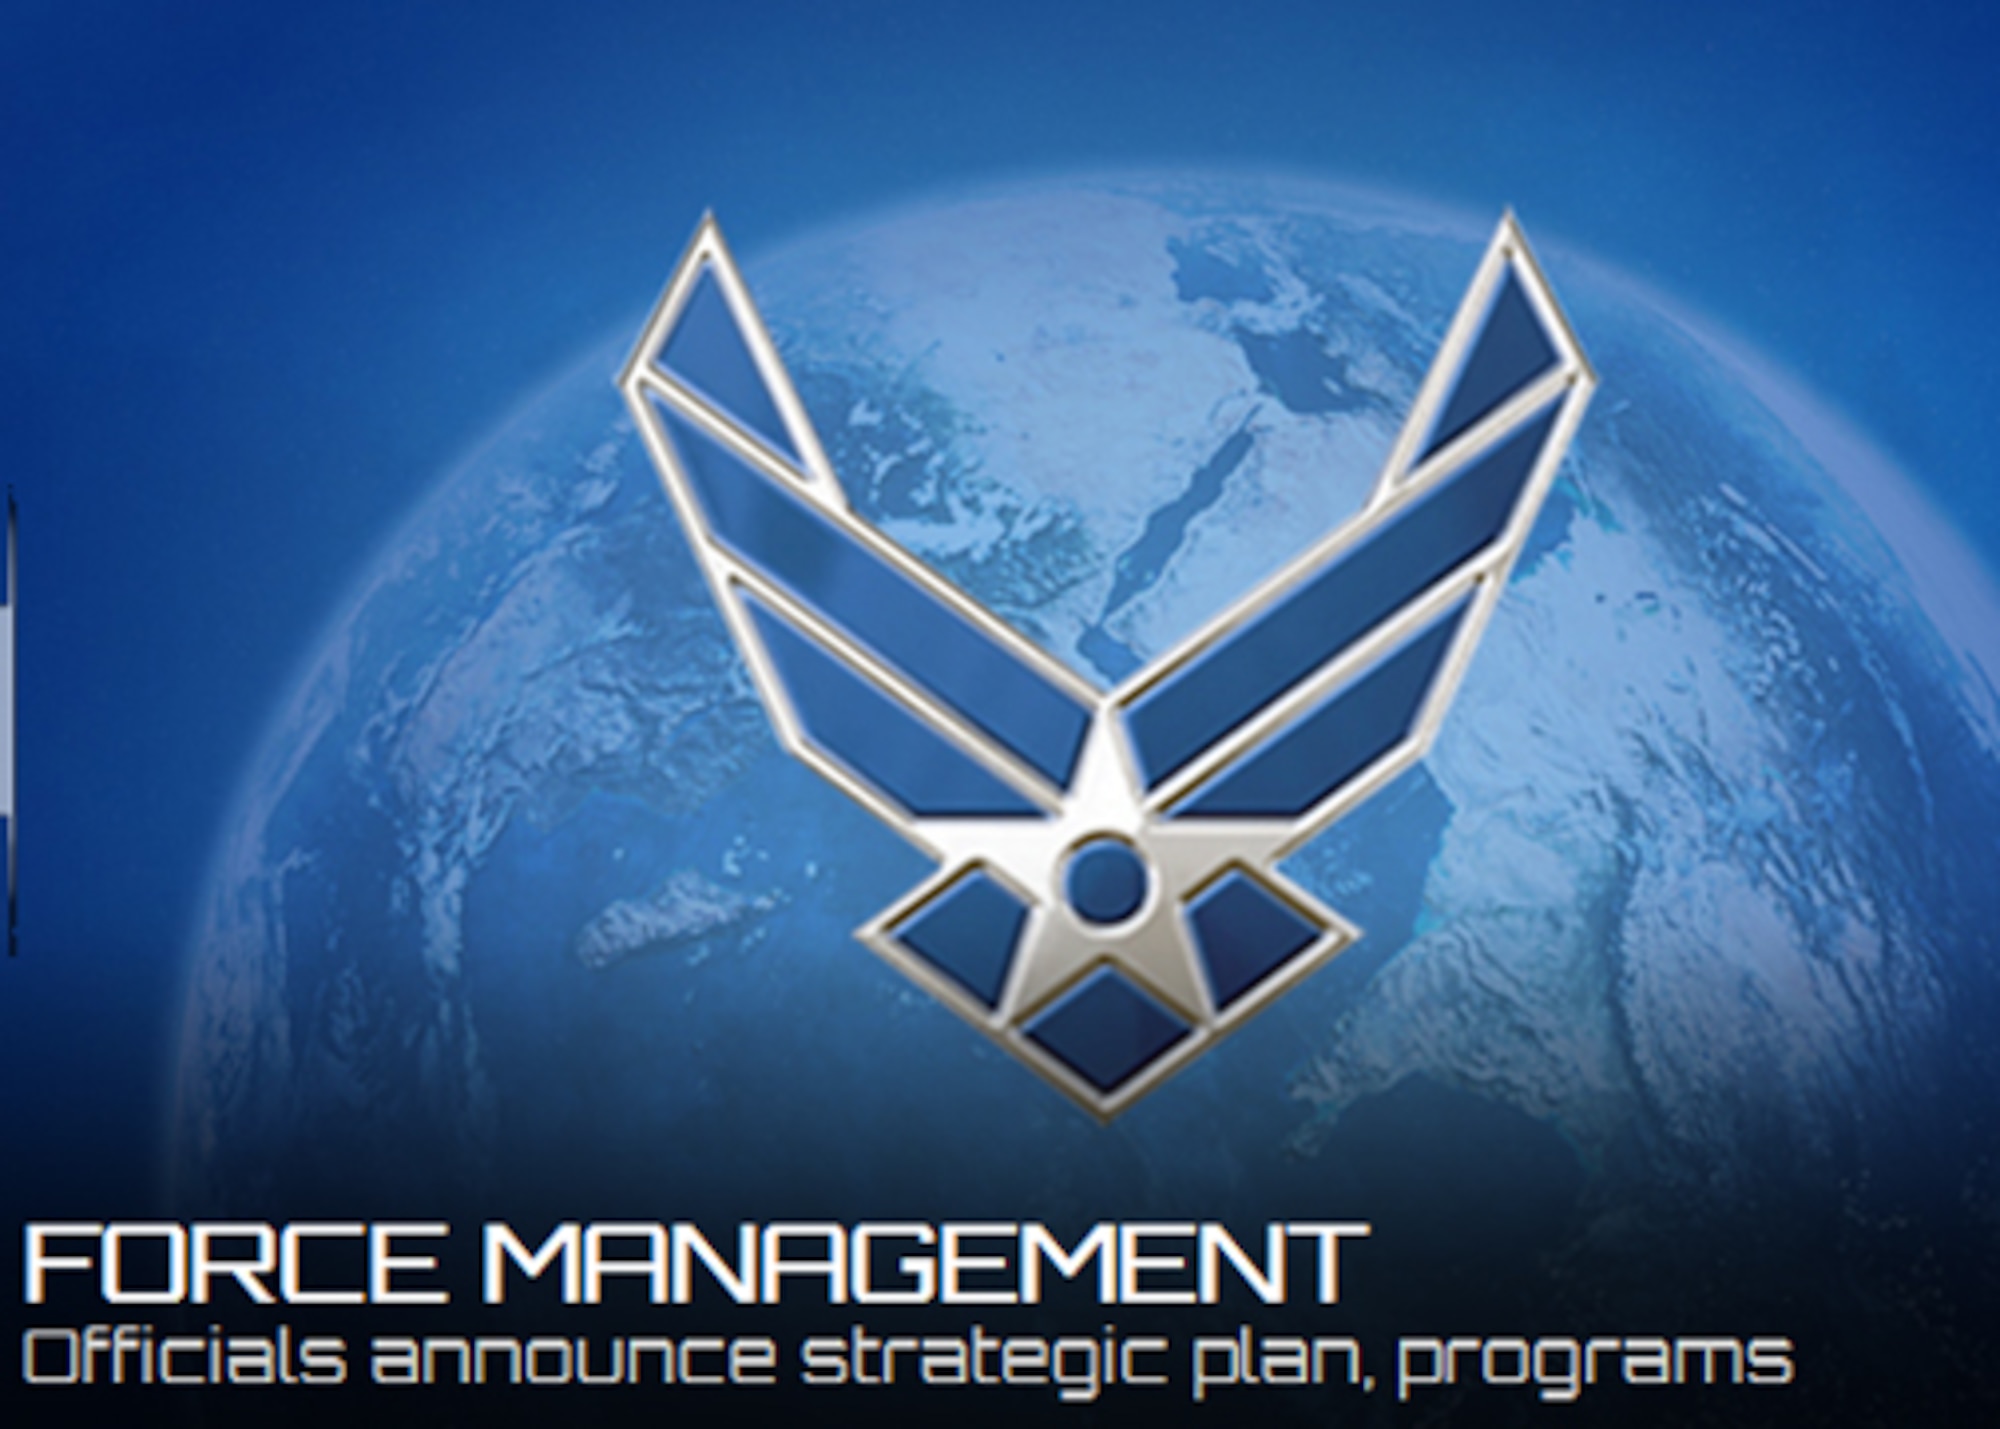 Air Force leaders announced force management programs Dec. 11 designed to reduce the force by thousands of Airmen over the next five years as a result of sequestration. (U.S. Air Force graphic)
